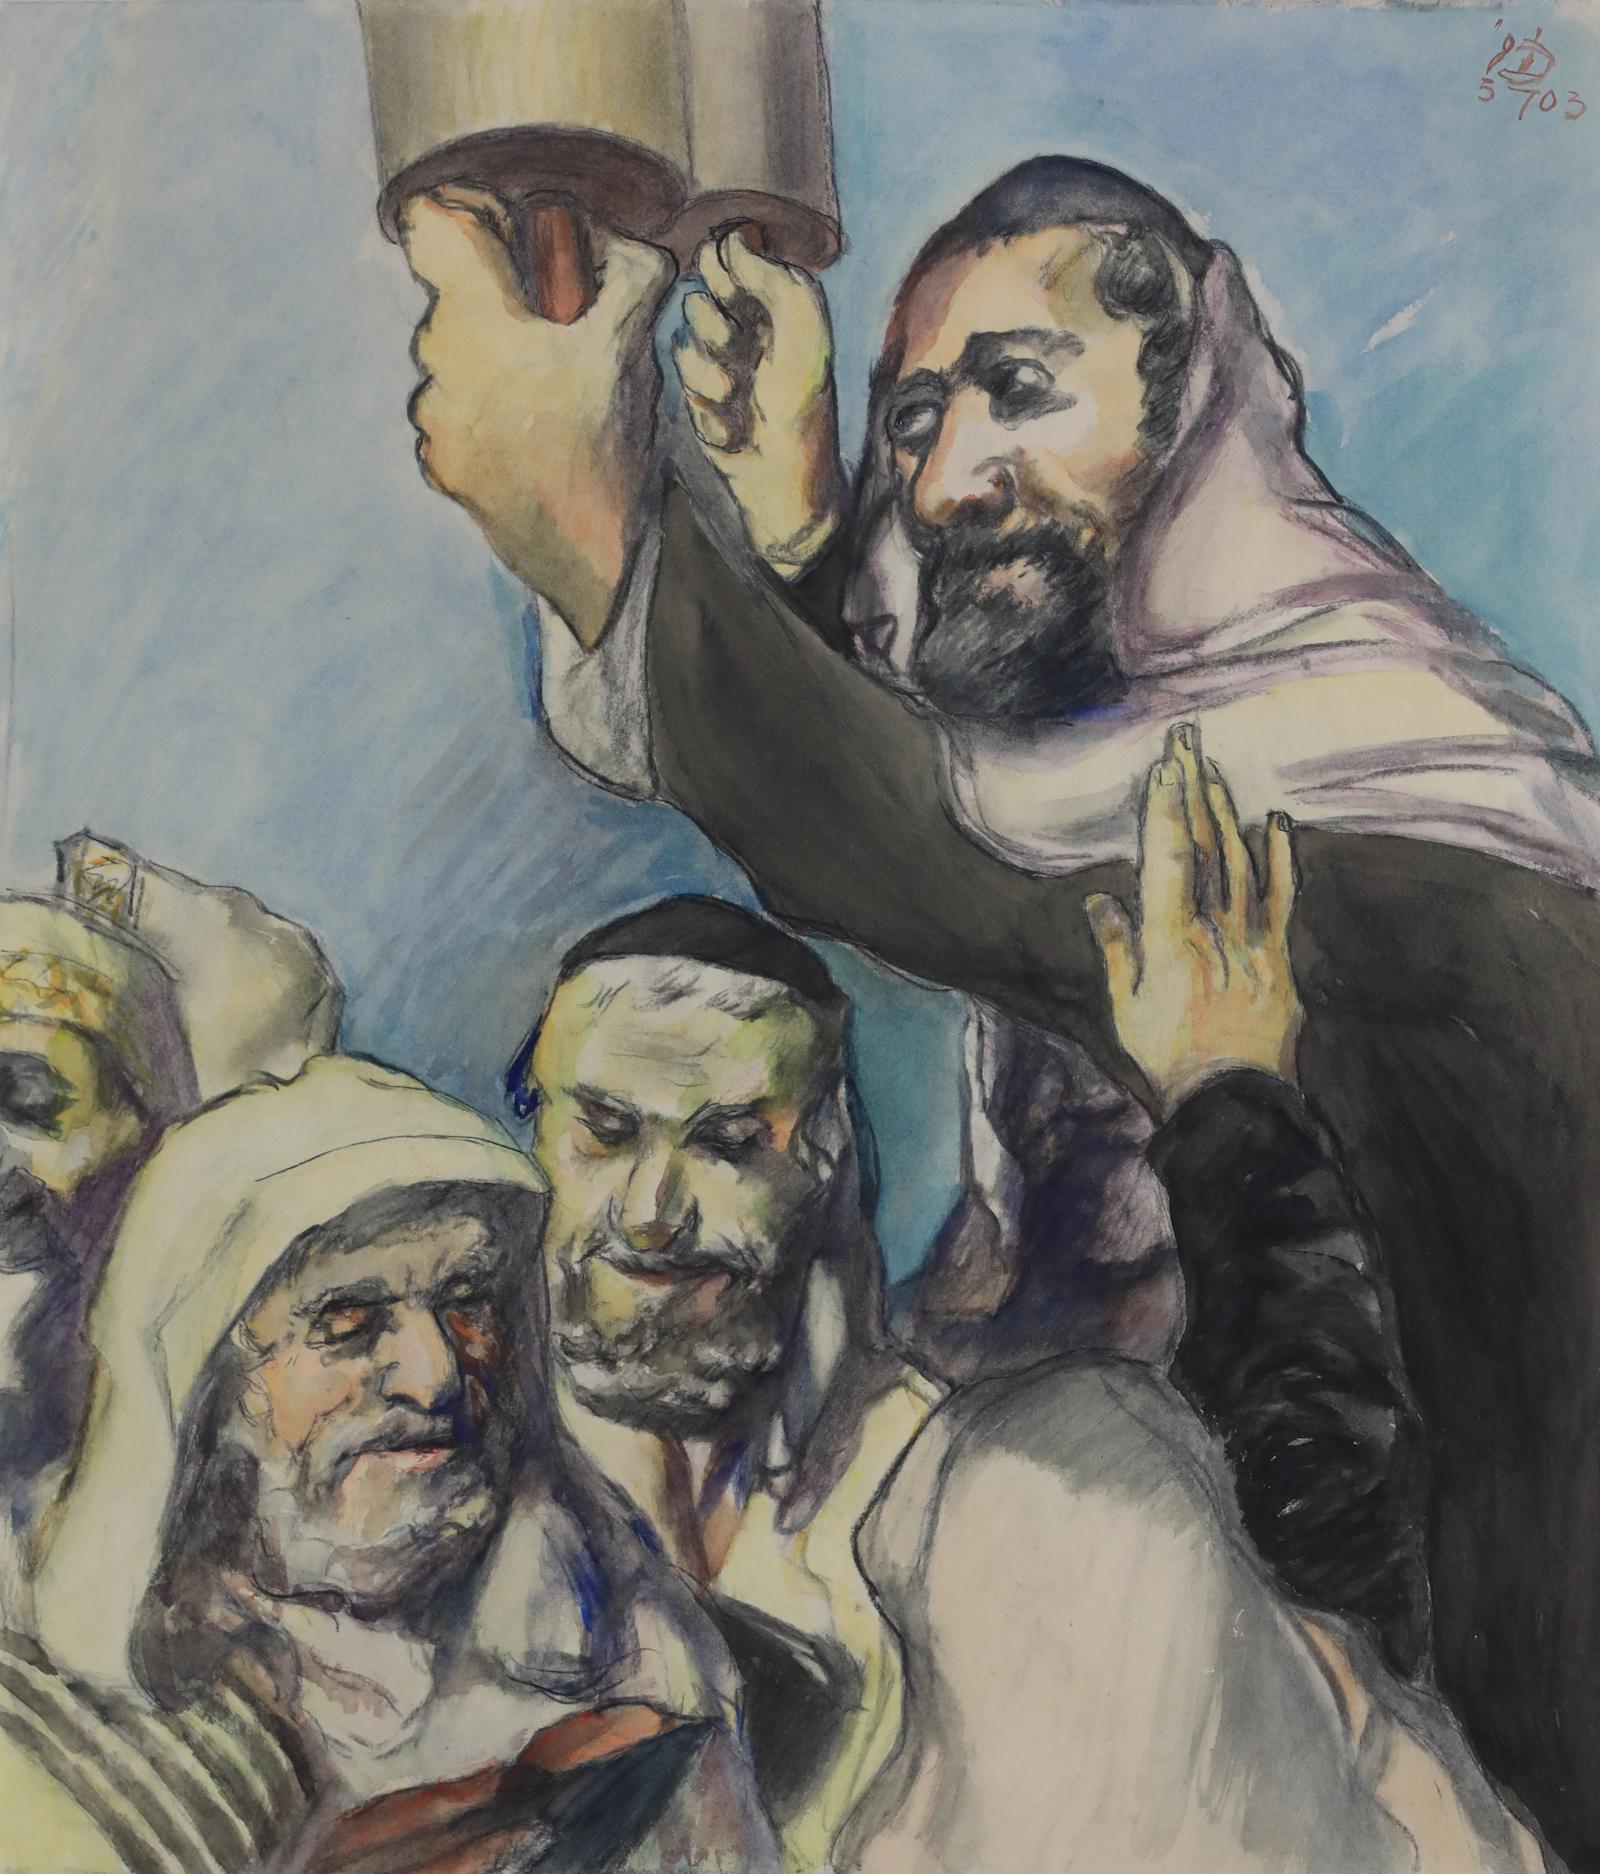 Lifting the Torah by Ludwig Meidner (1884-1966)
Watercolour on paper
67 x 56 cm (26 ³/₈ x 22 inches)
Signed upper right, LM
Executed in 1943

